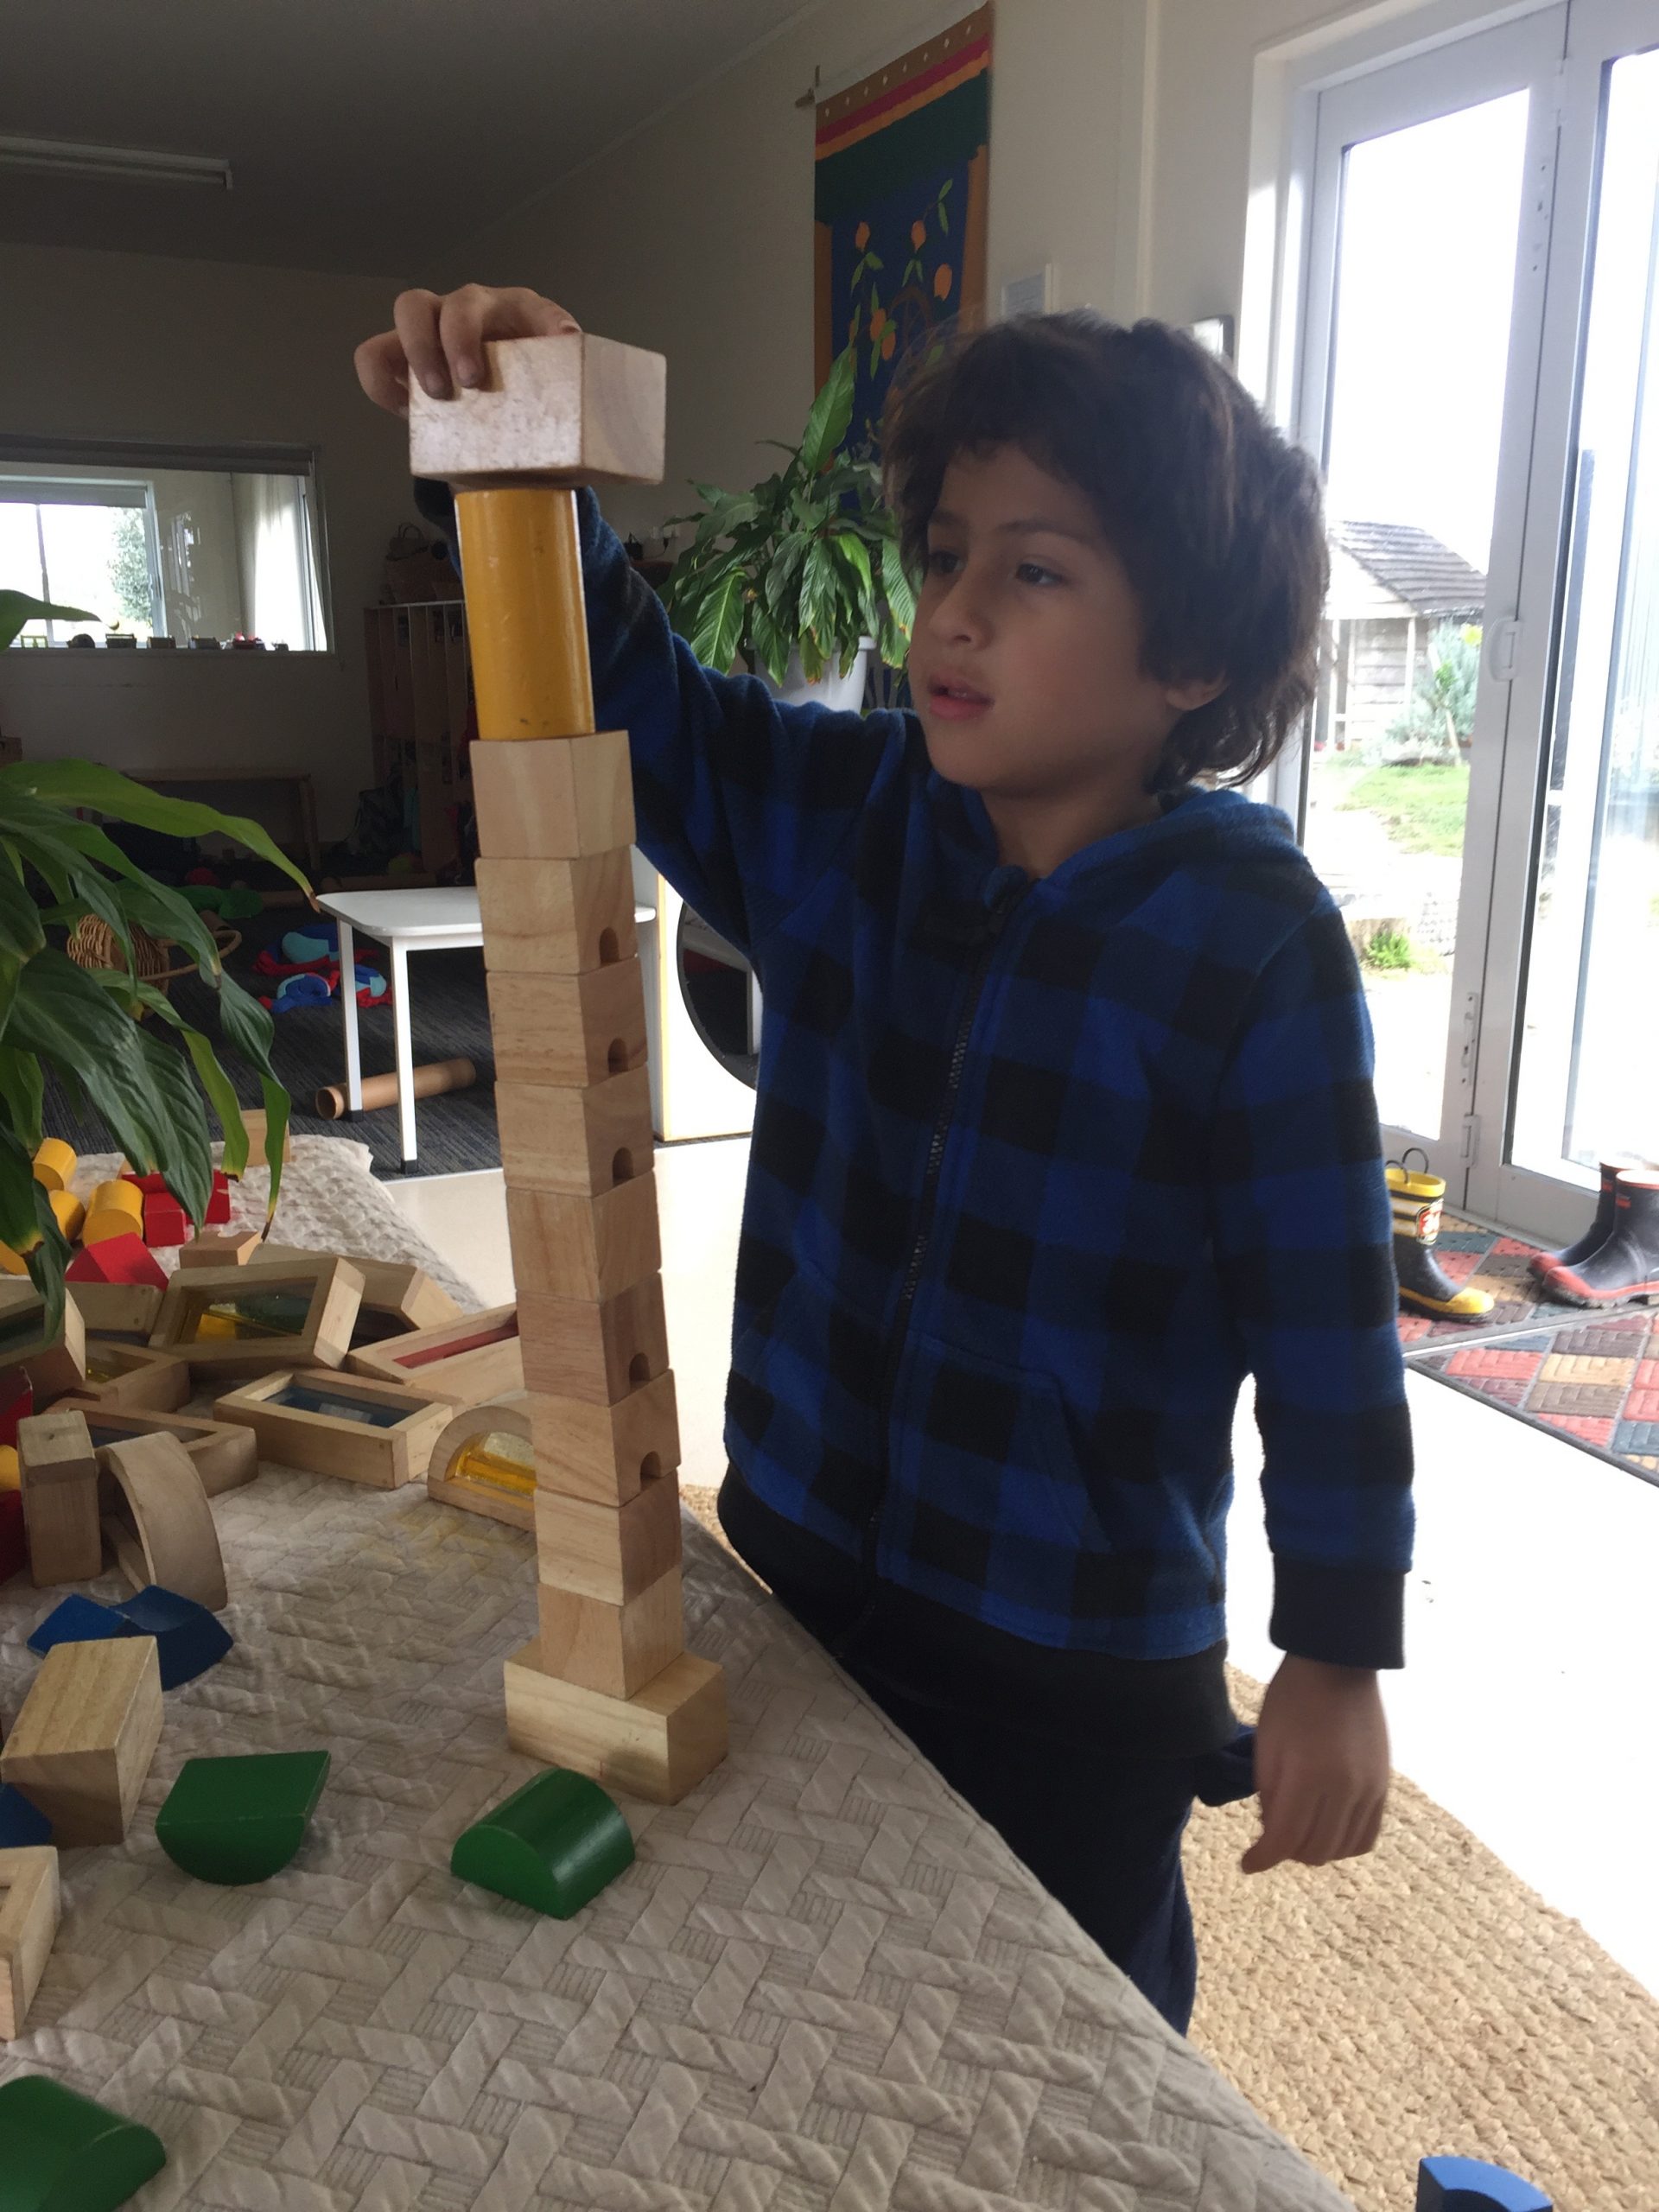 Kane building a tower with blocks by himself at home